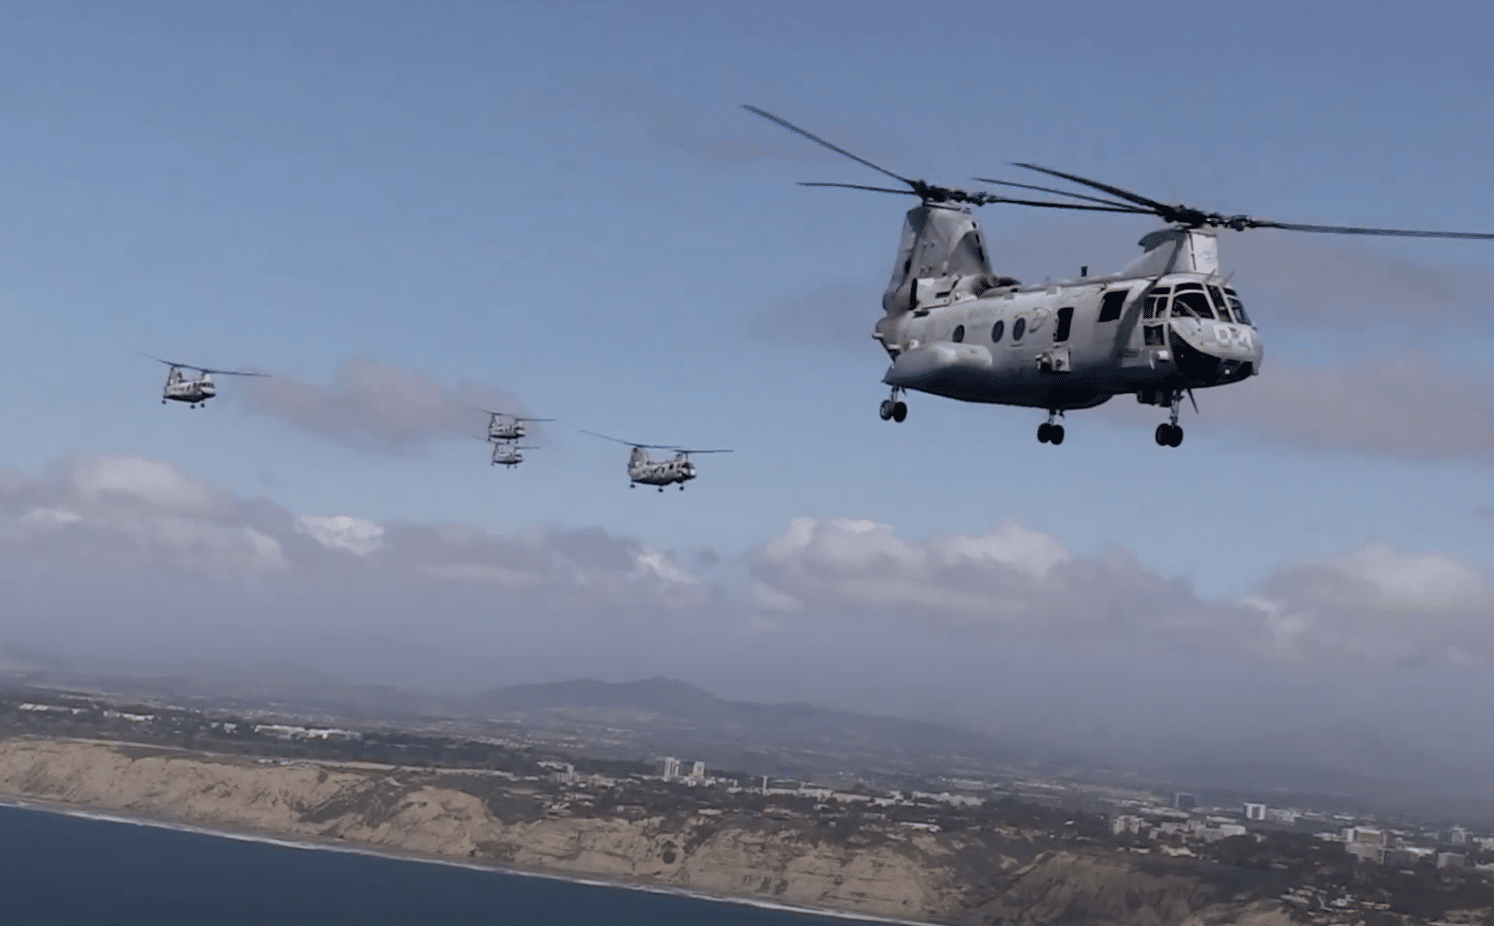 Watch: Iconic US Marine CH-46 Sea Knight helicopter takes last flight after  47 years of service